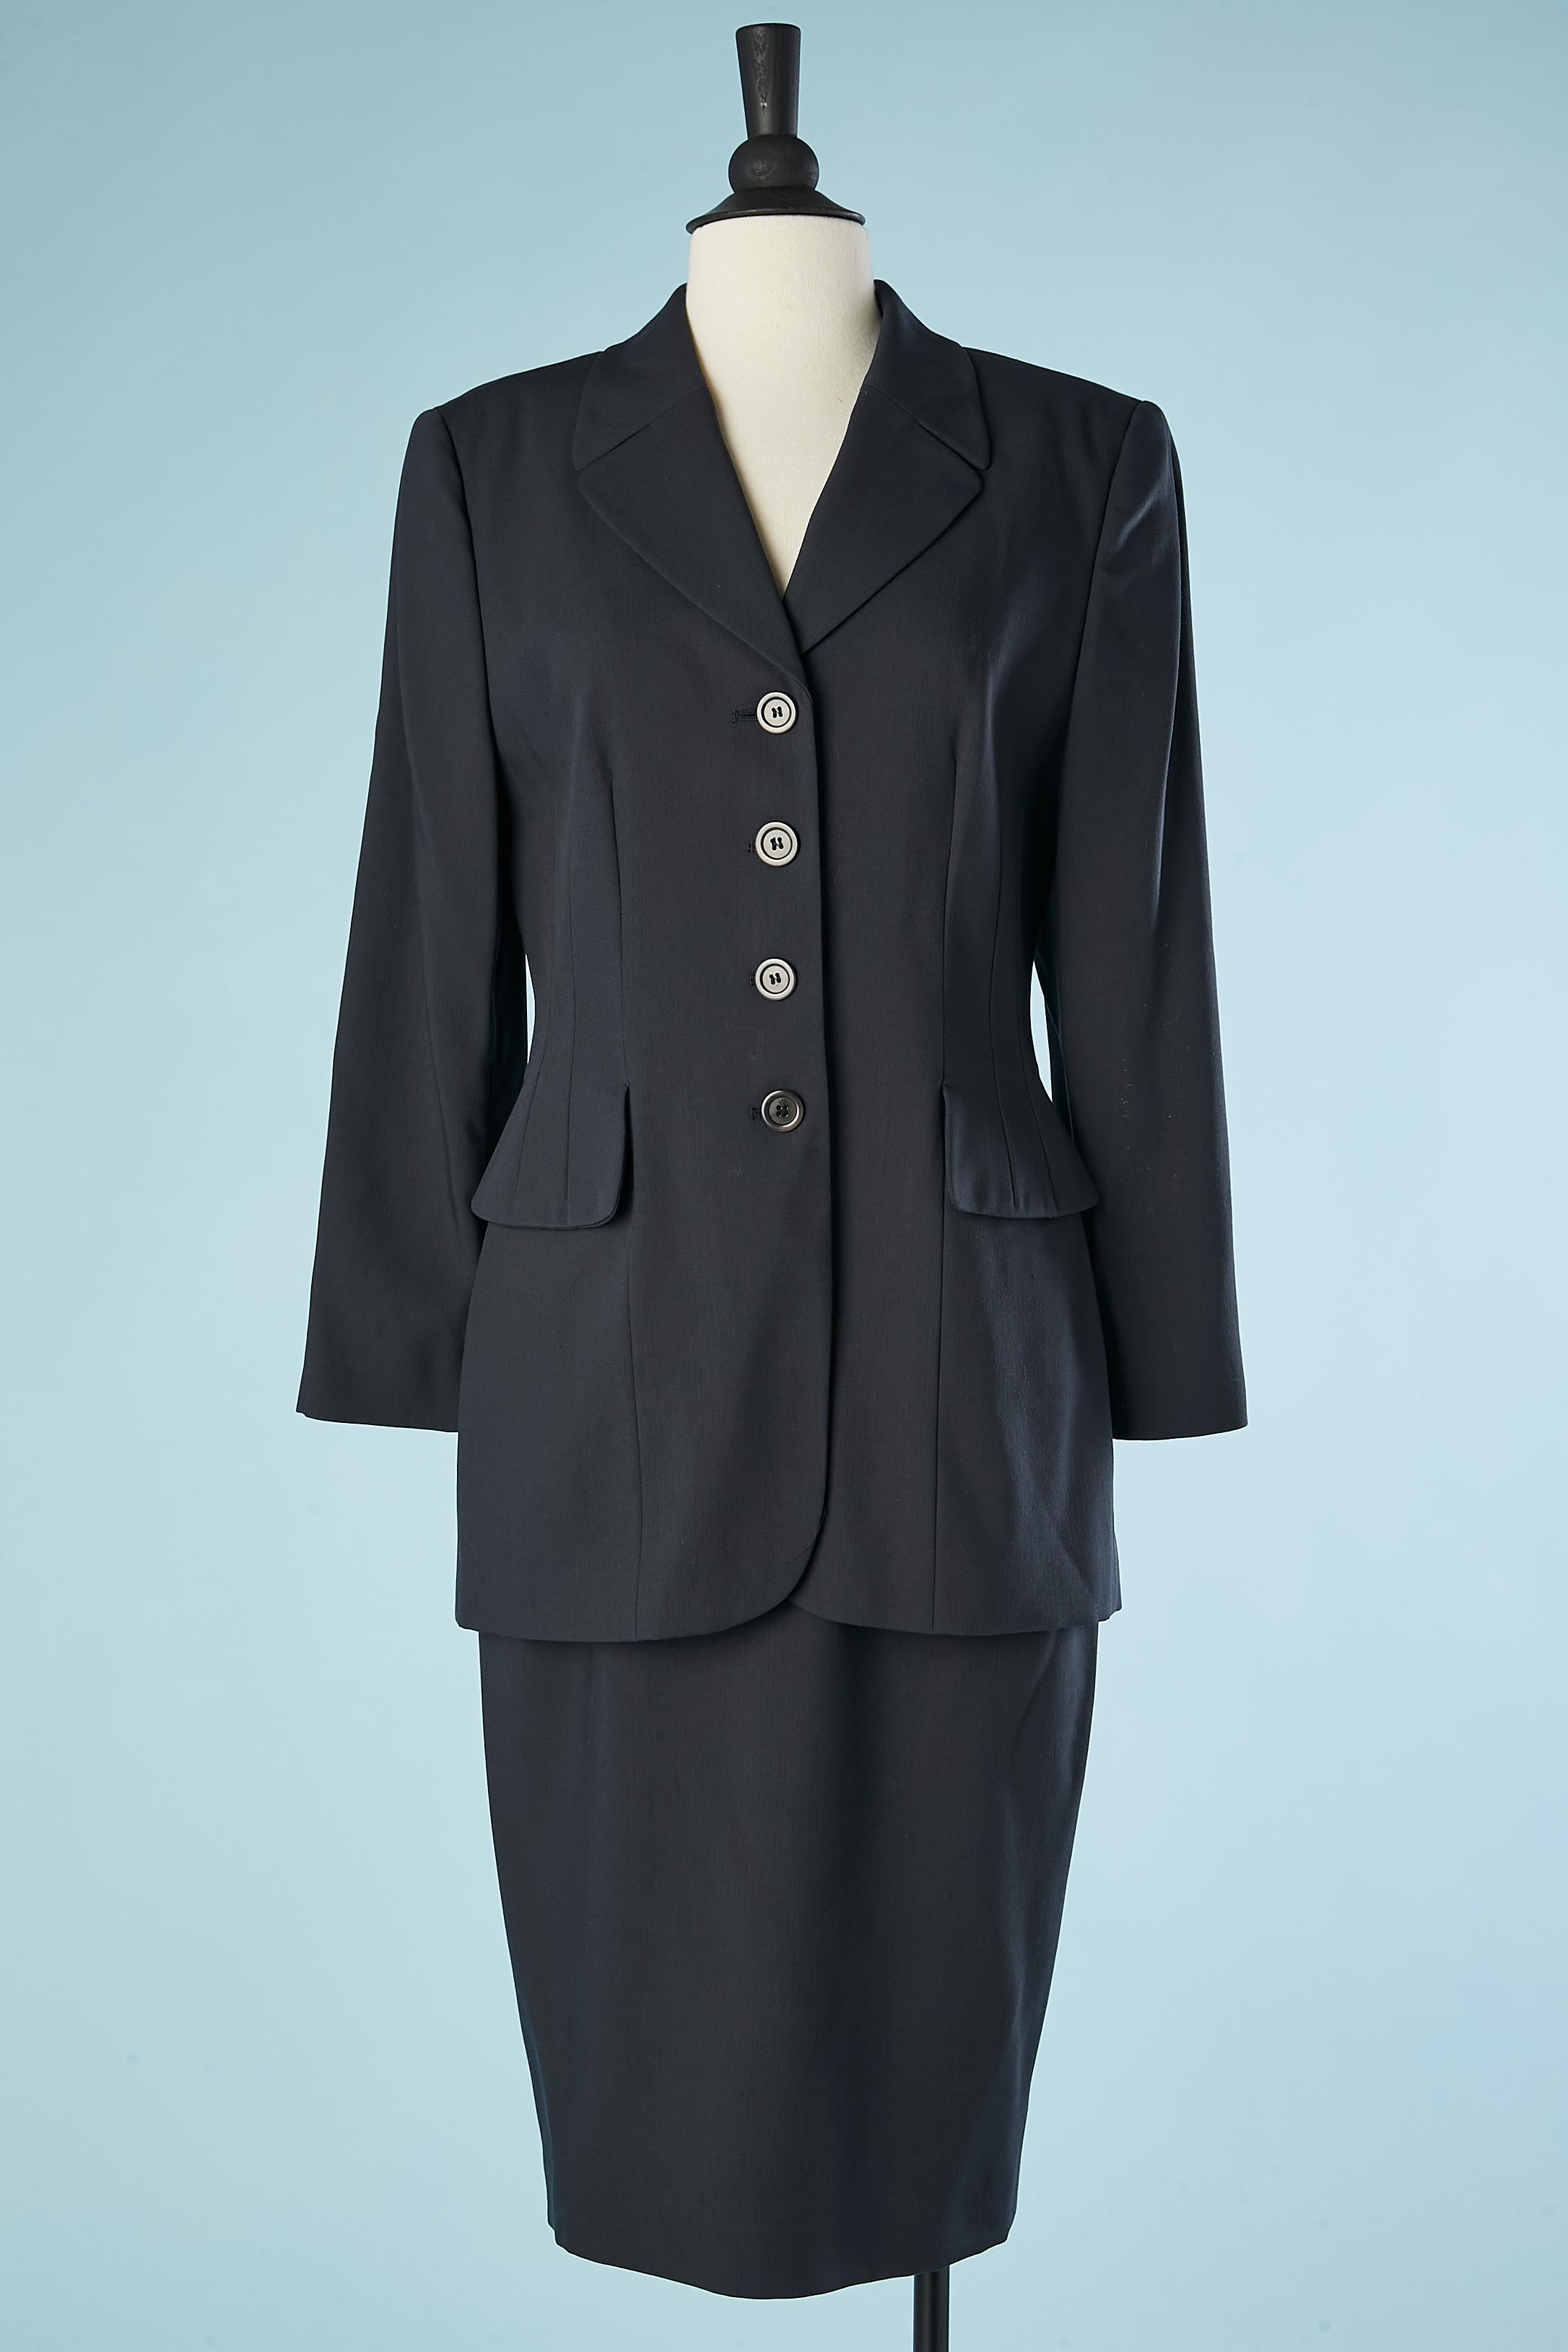 Wool navy blue trouser-suit (and skirt as well) Cerruti 1881 For Sale 6